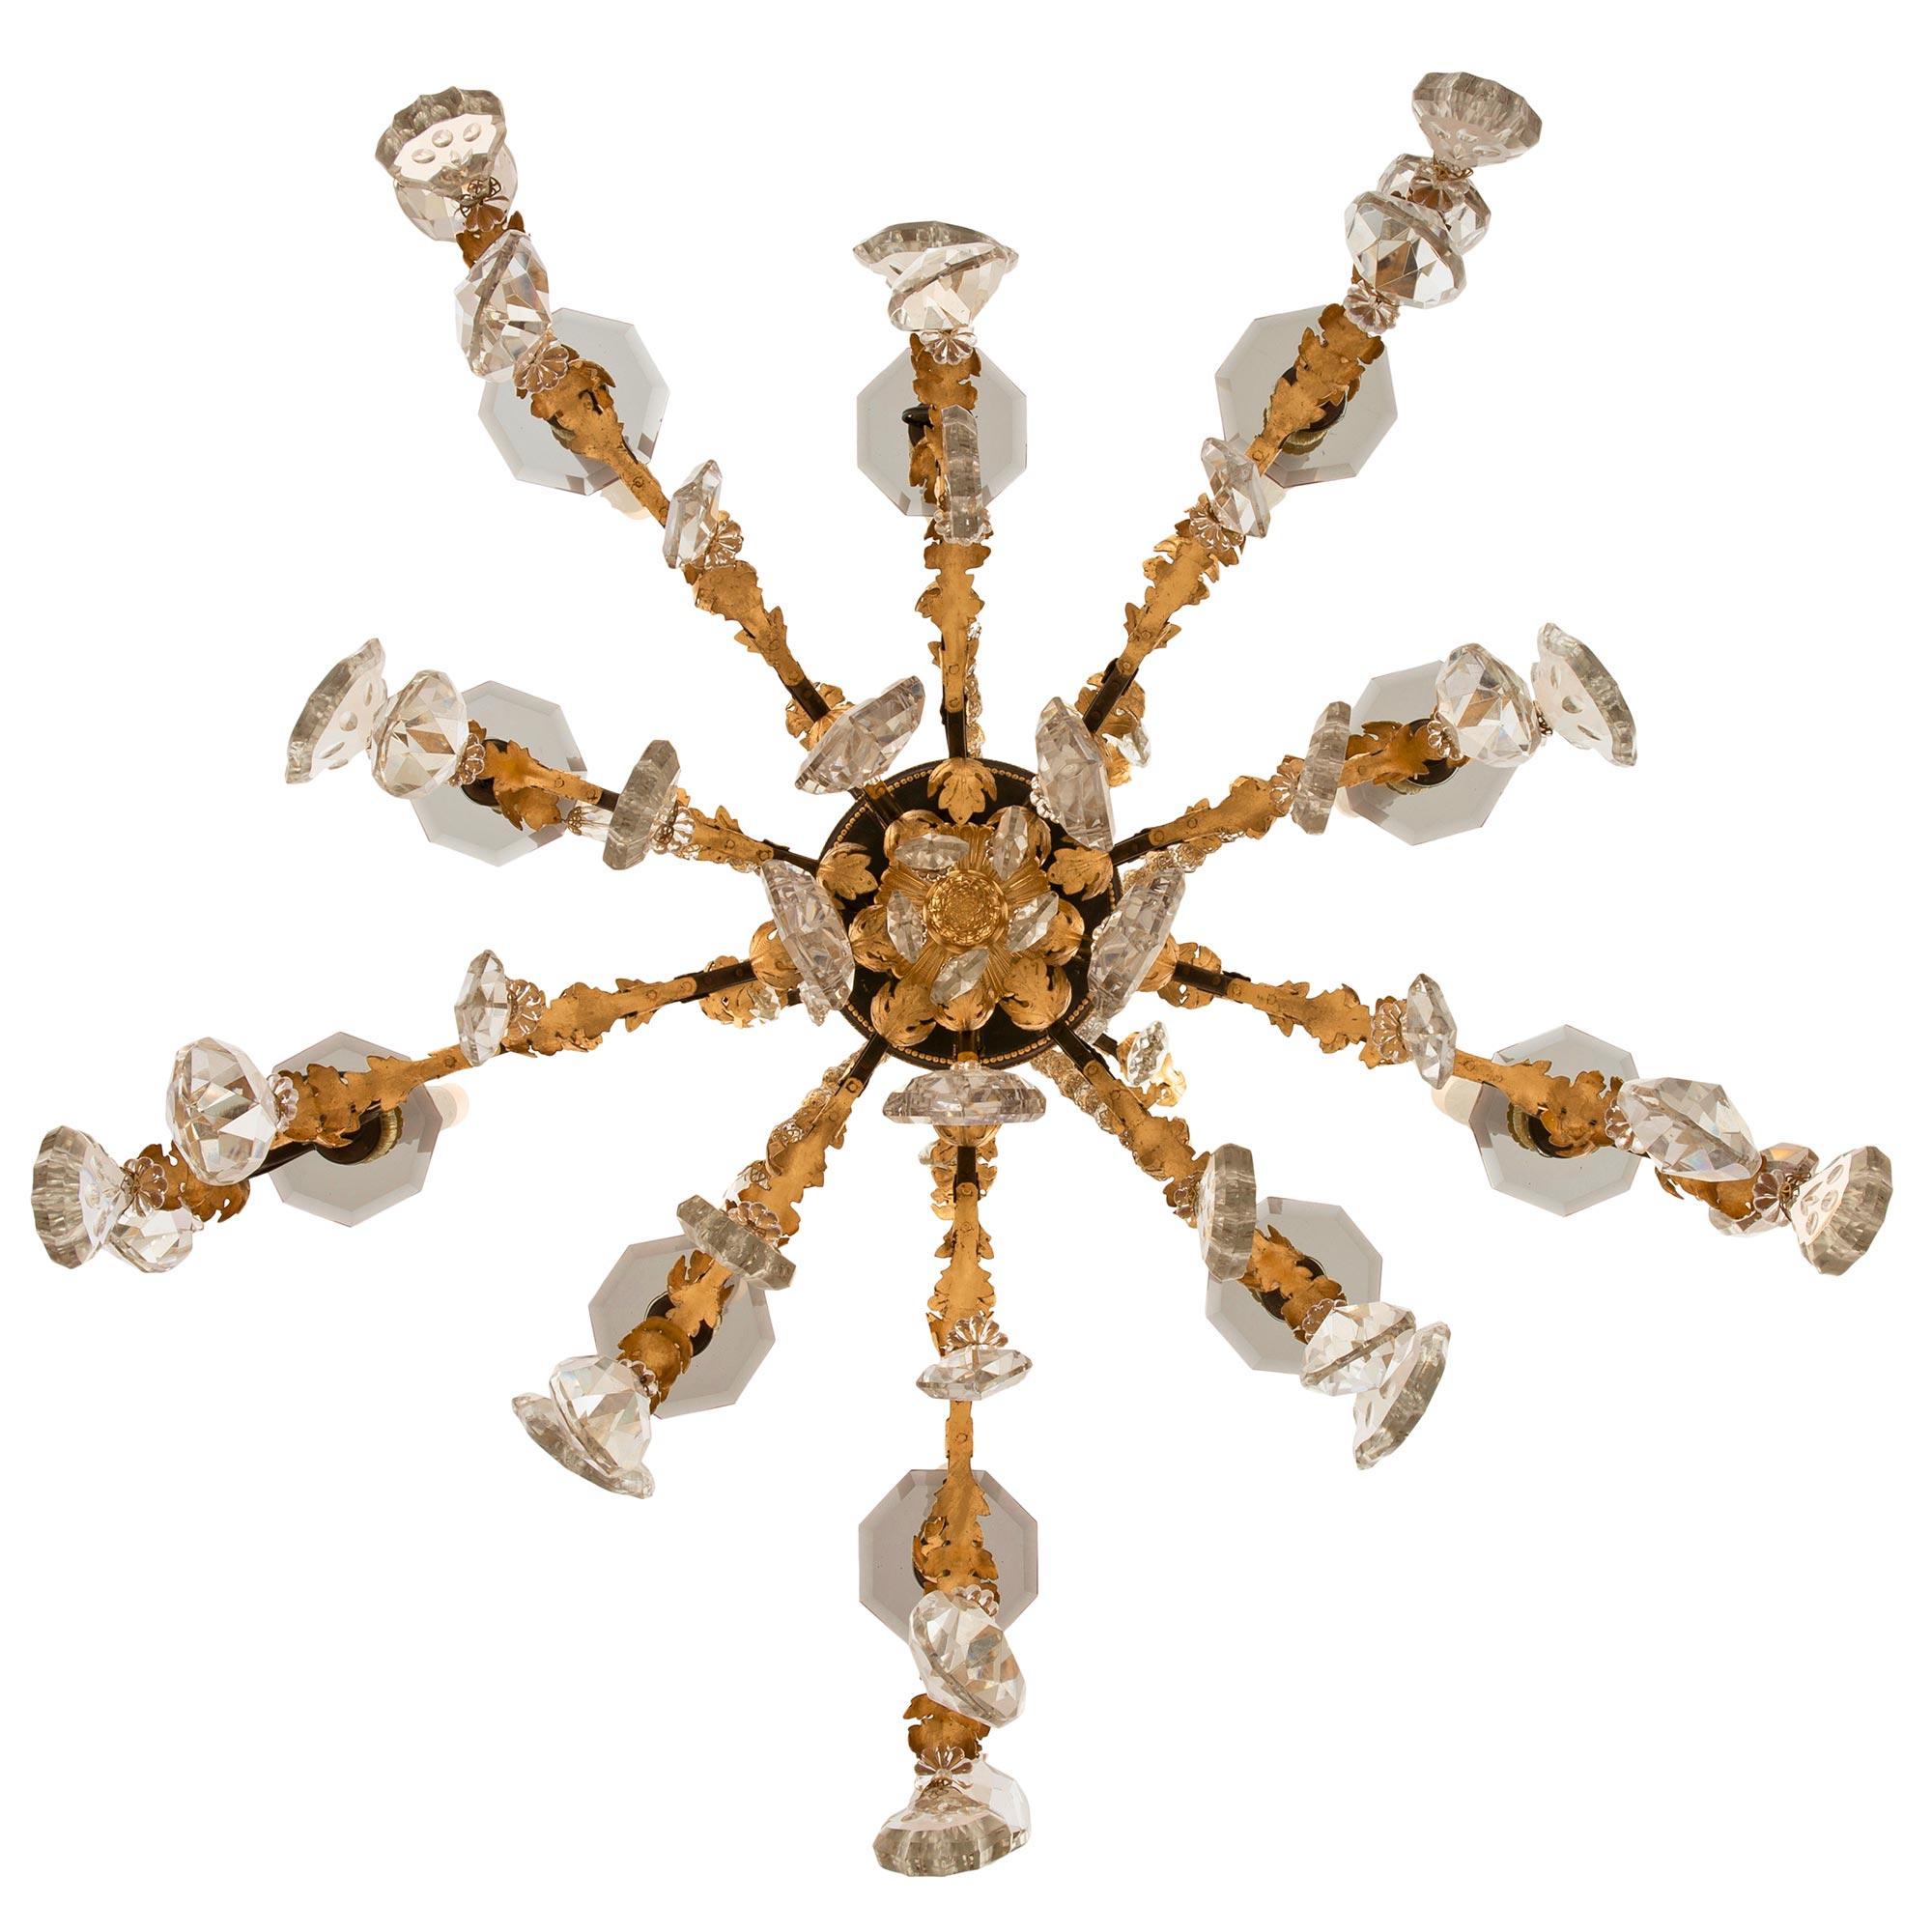 French 19th Century Louis XVI St. Crystal, Ormolu, and Wrought Iron Chandelier For Sale 3